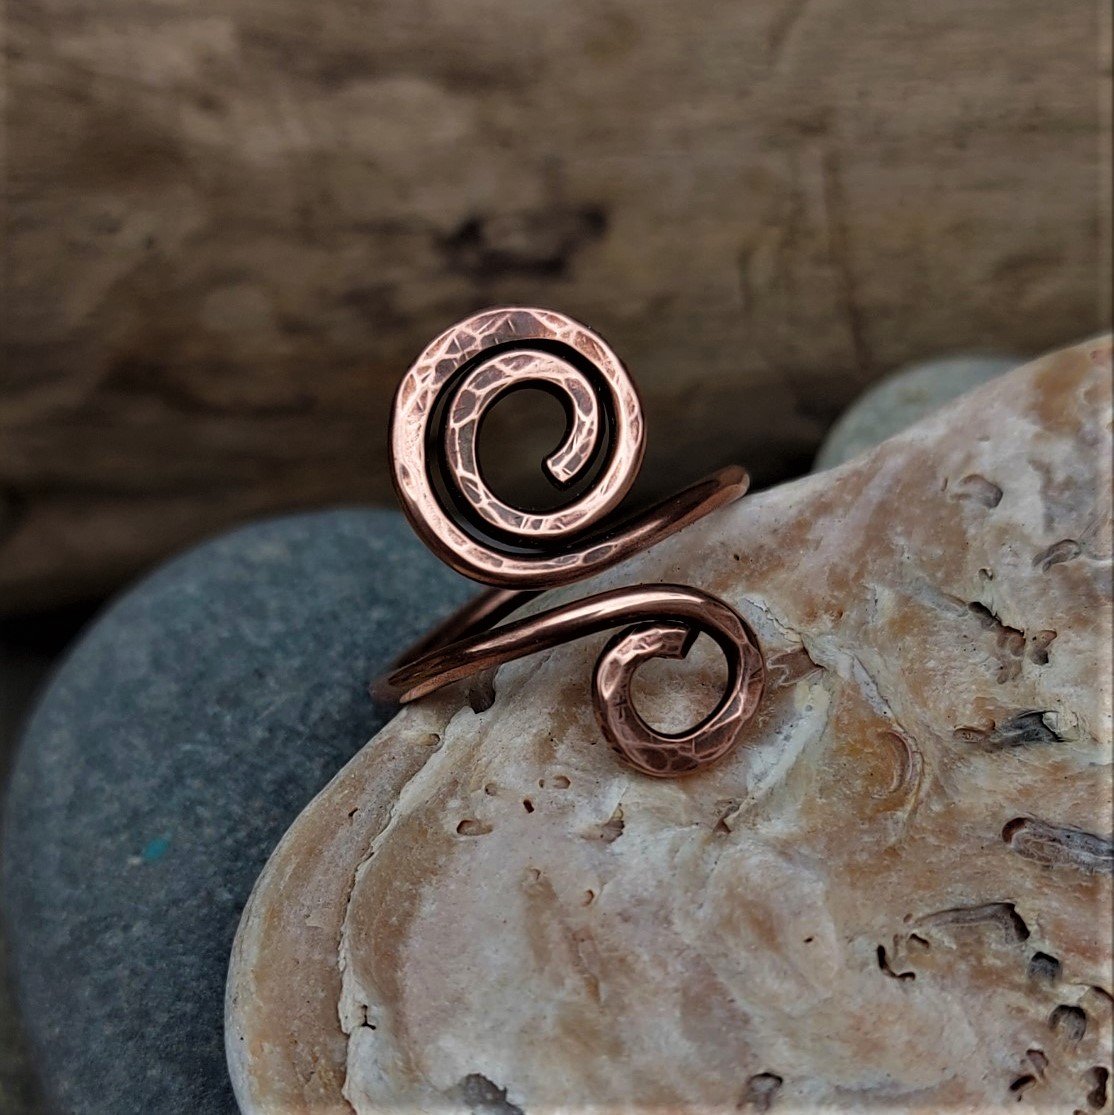 Share 165+ copper rings for healing